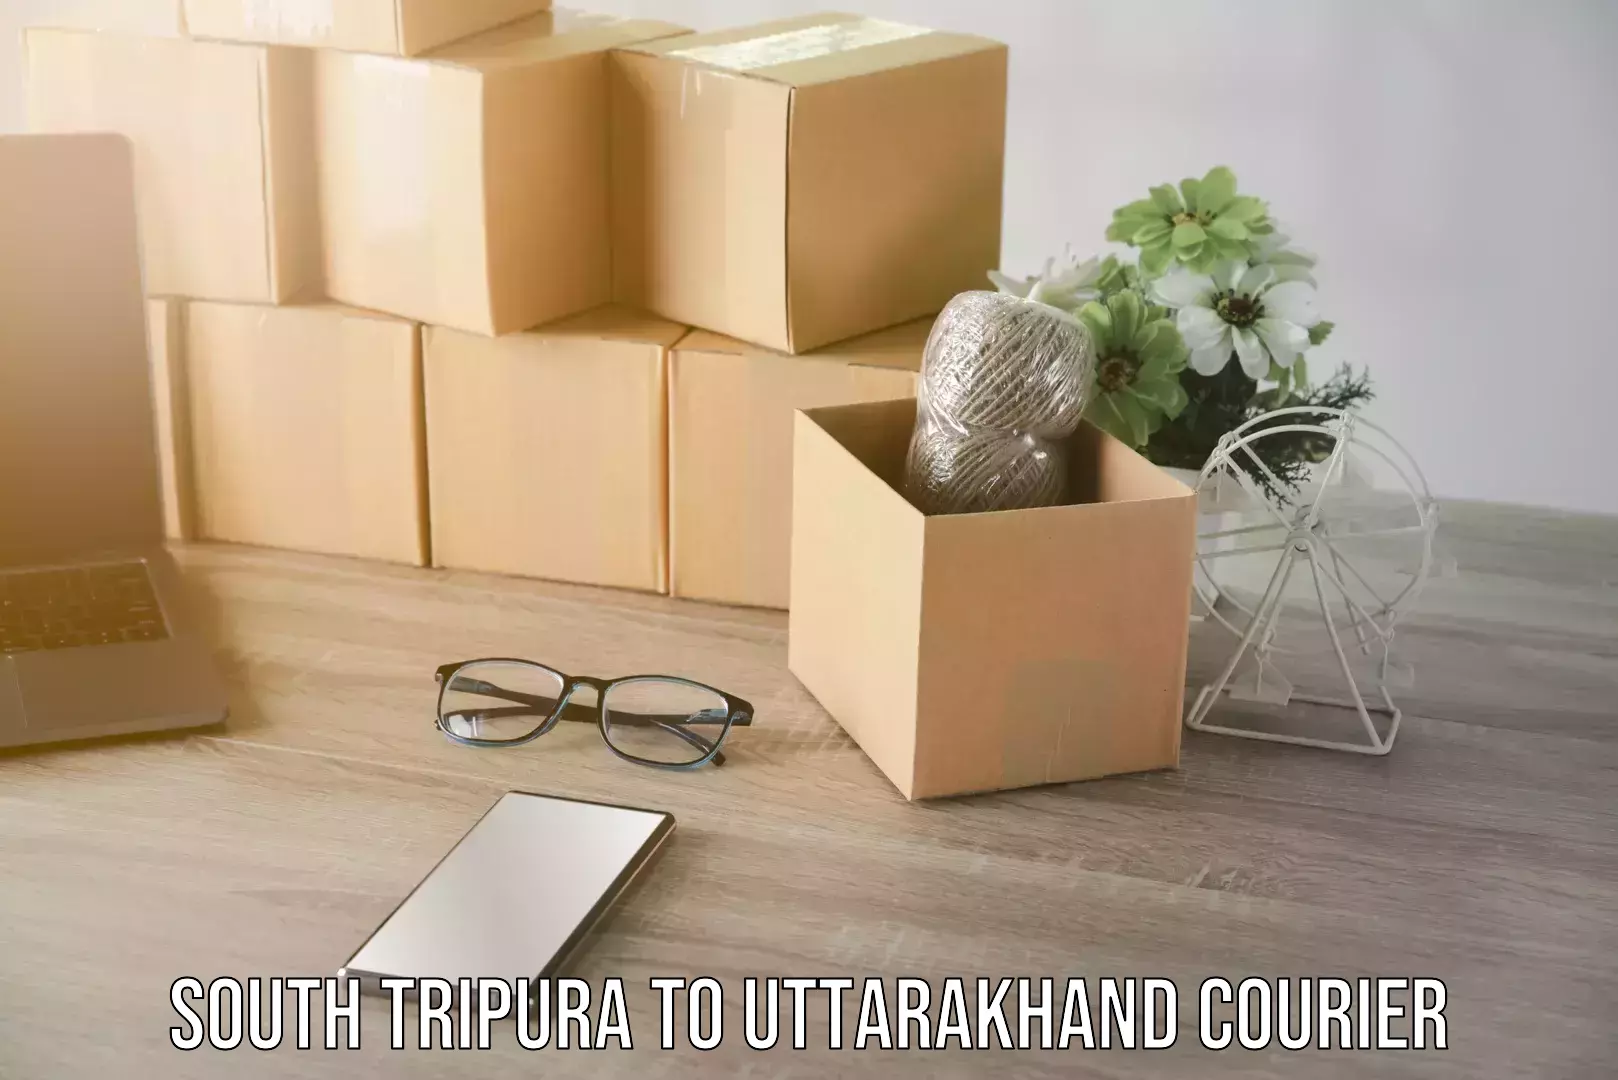 End-to-end delivery South Tripura to Uttarakhand